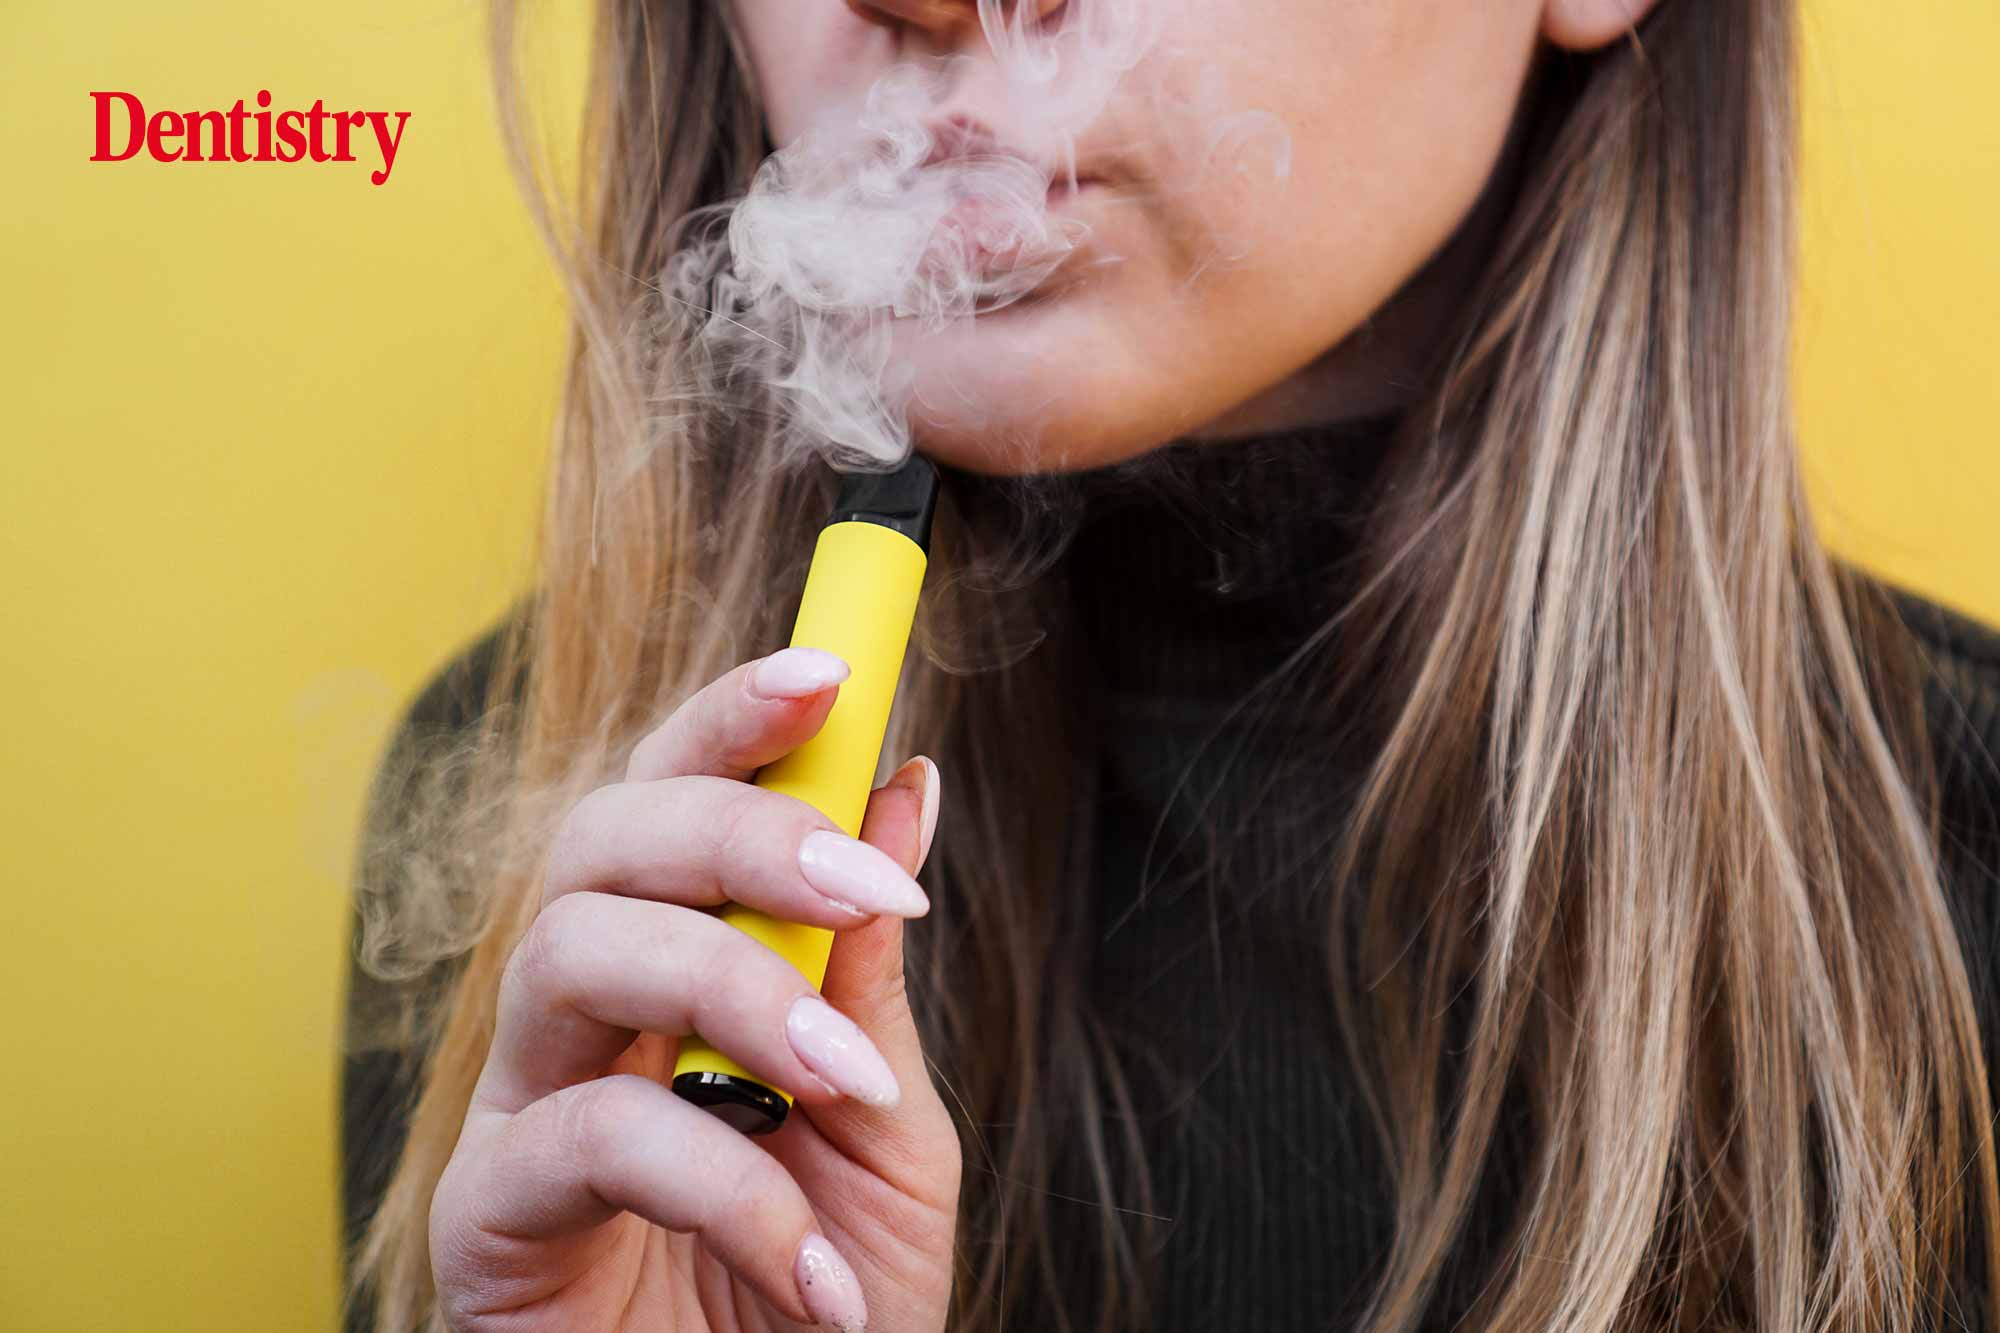 Patients who use vaping devices are more likely to develop decay, new research has found, showing a 'significant difference' in caries risks.